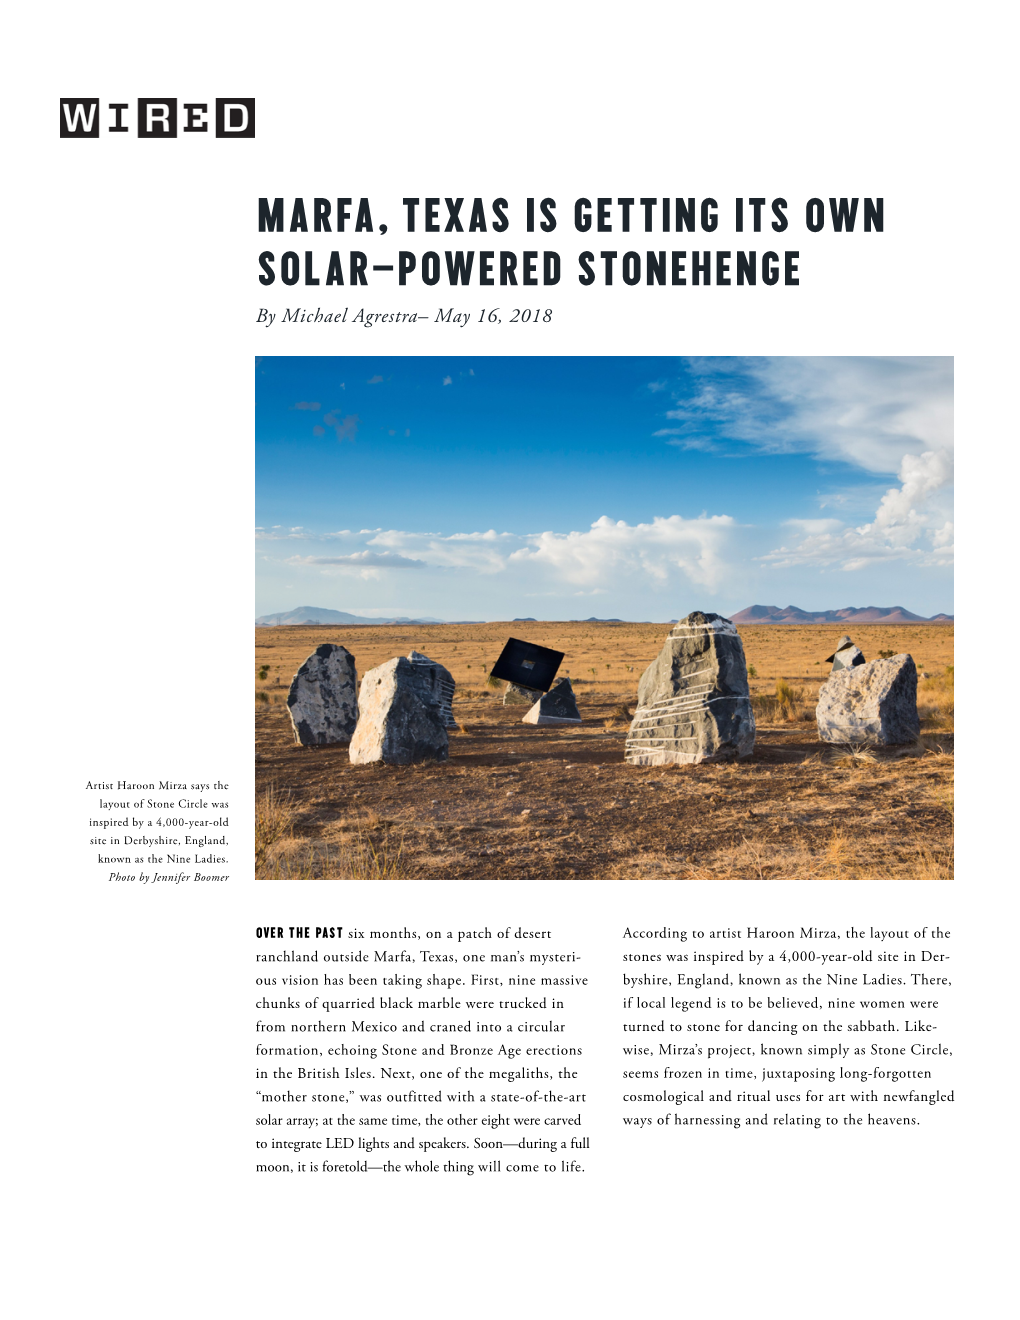 Marfa, Texas Is Getting Its Own Solar-Powered Stonehenge by Michael Agrestra– May 16, 2018